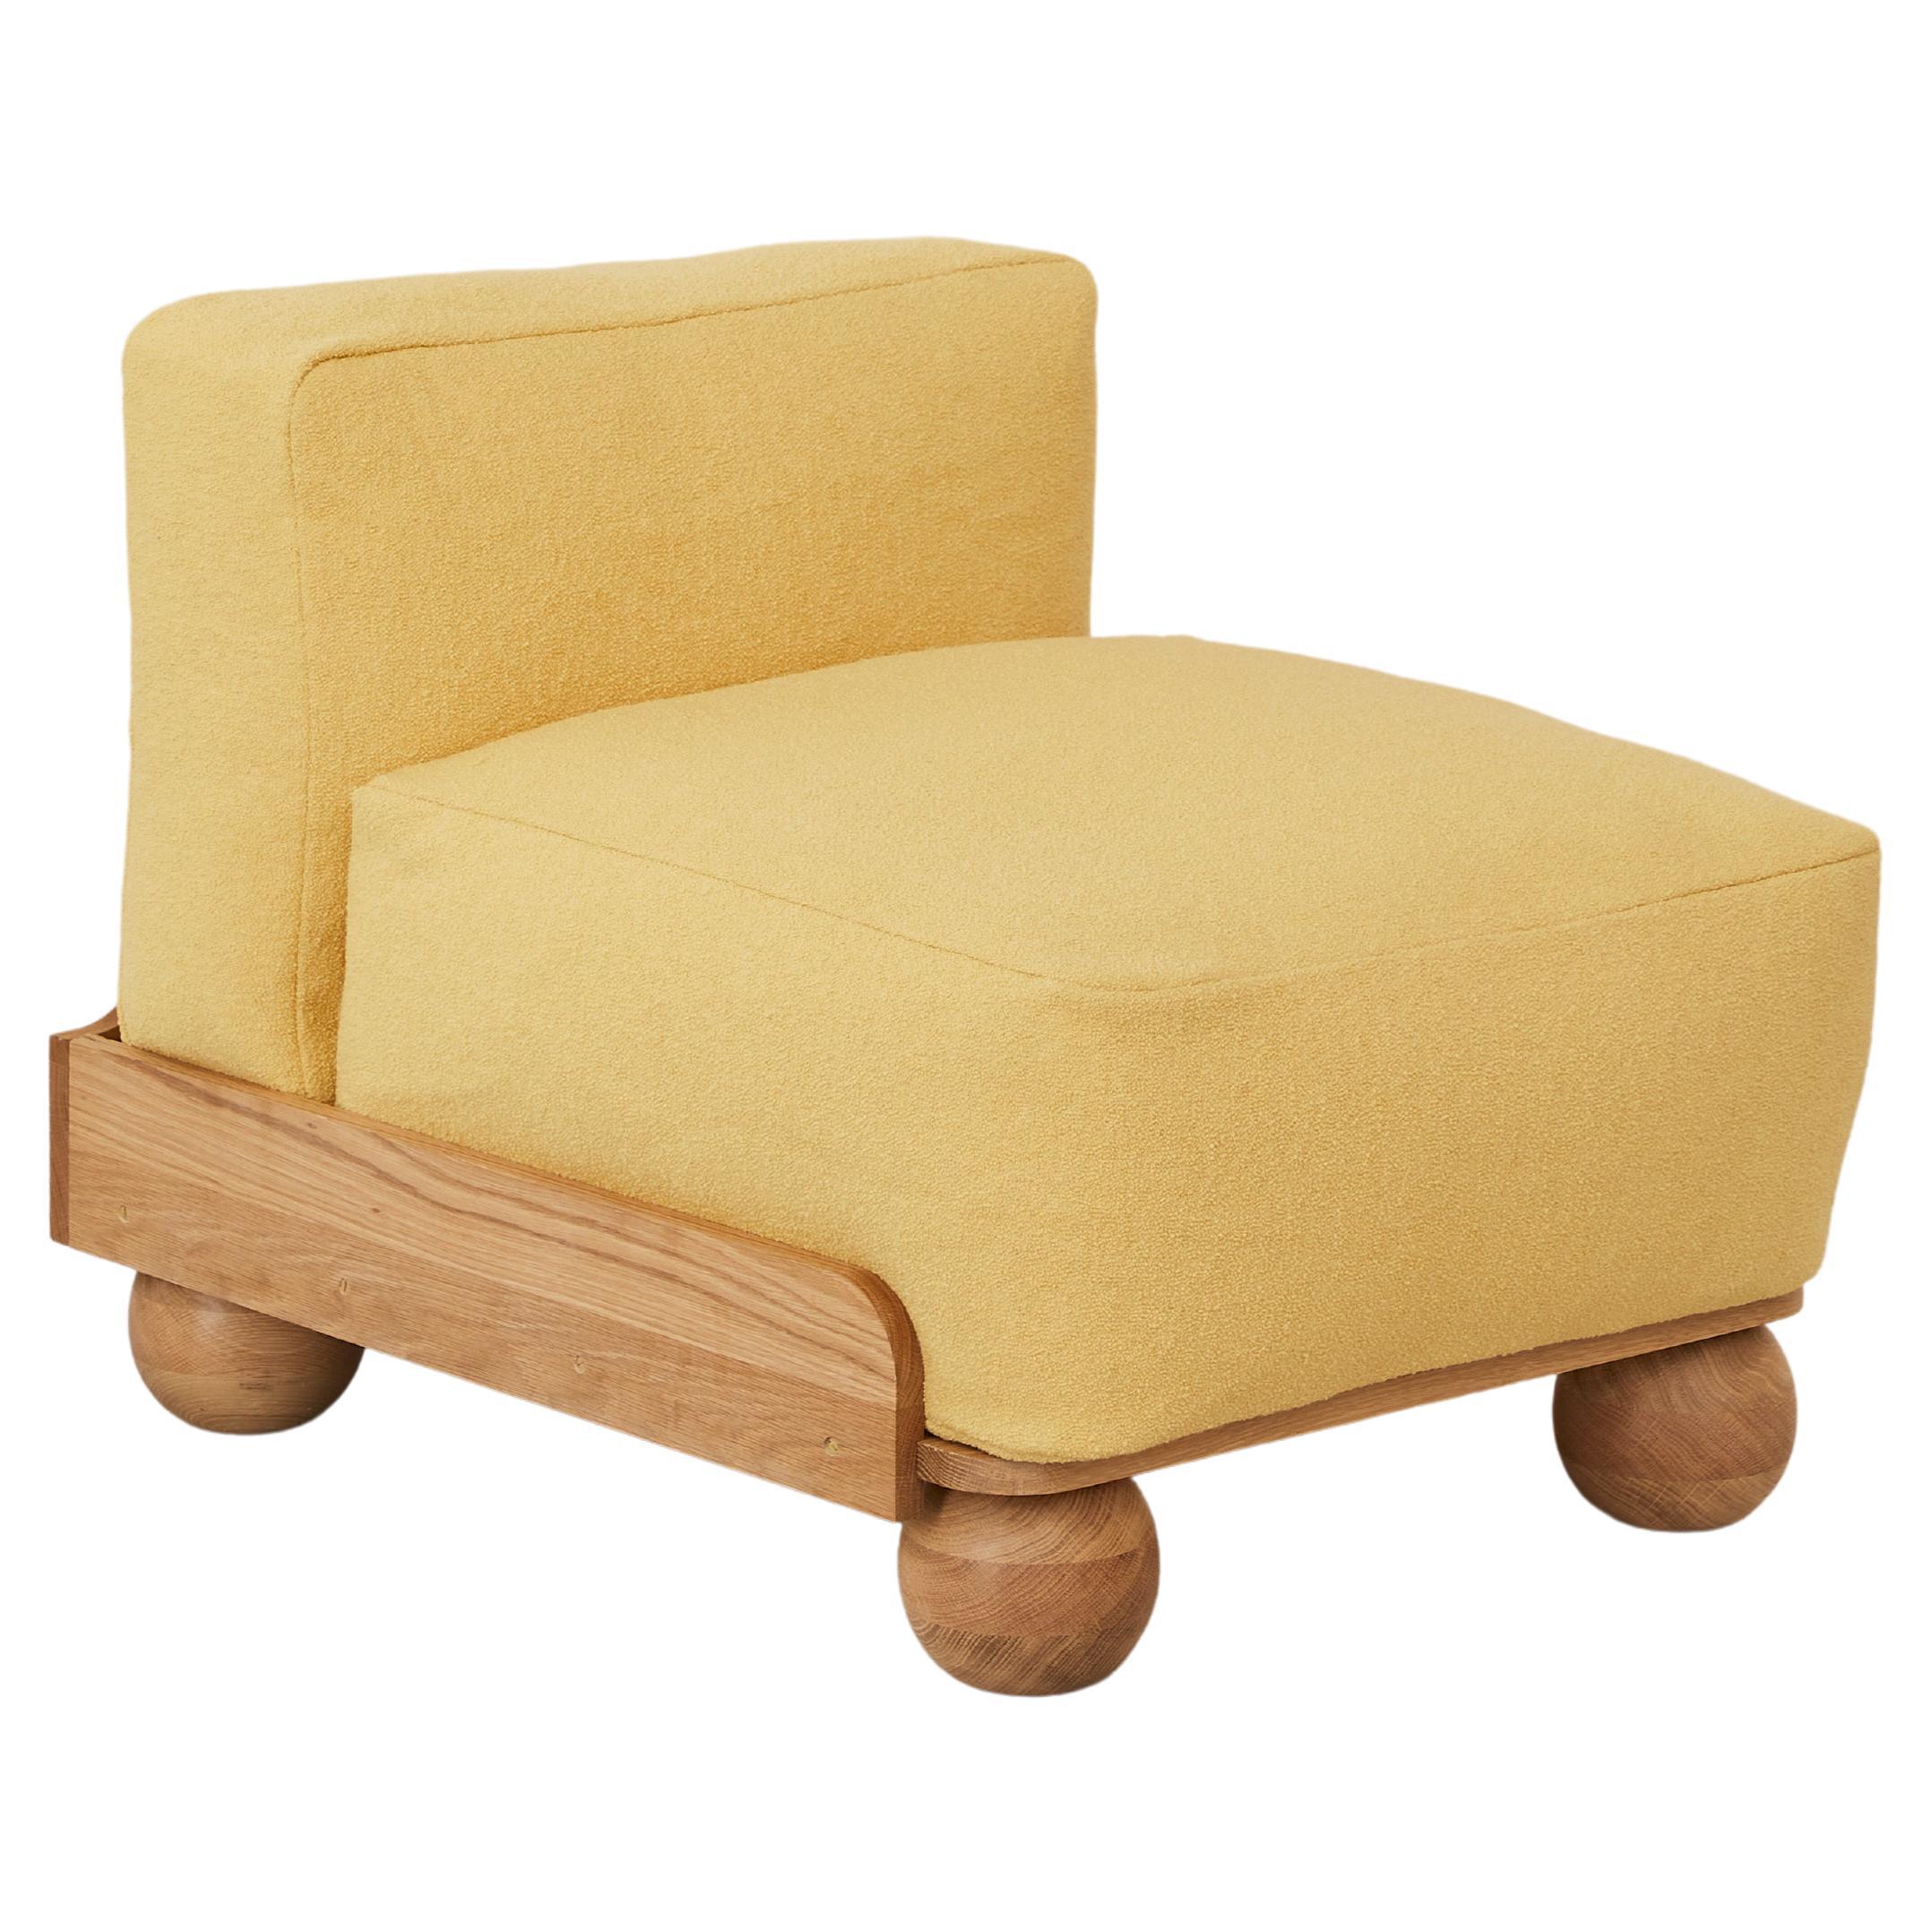 Cove Slipper Chair in Straw Yellow